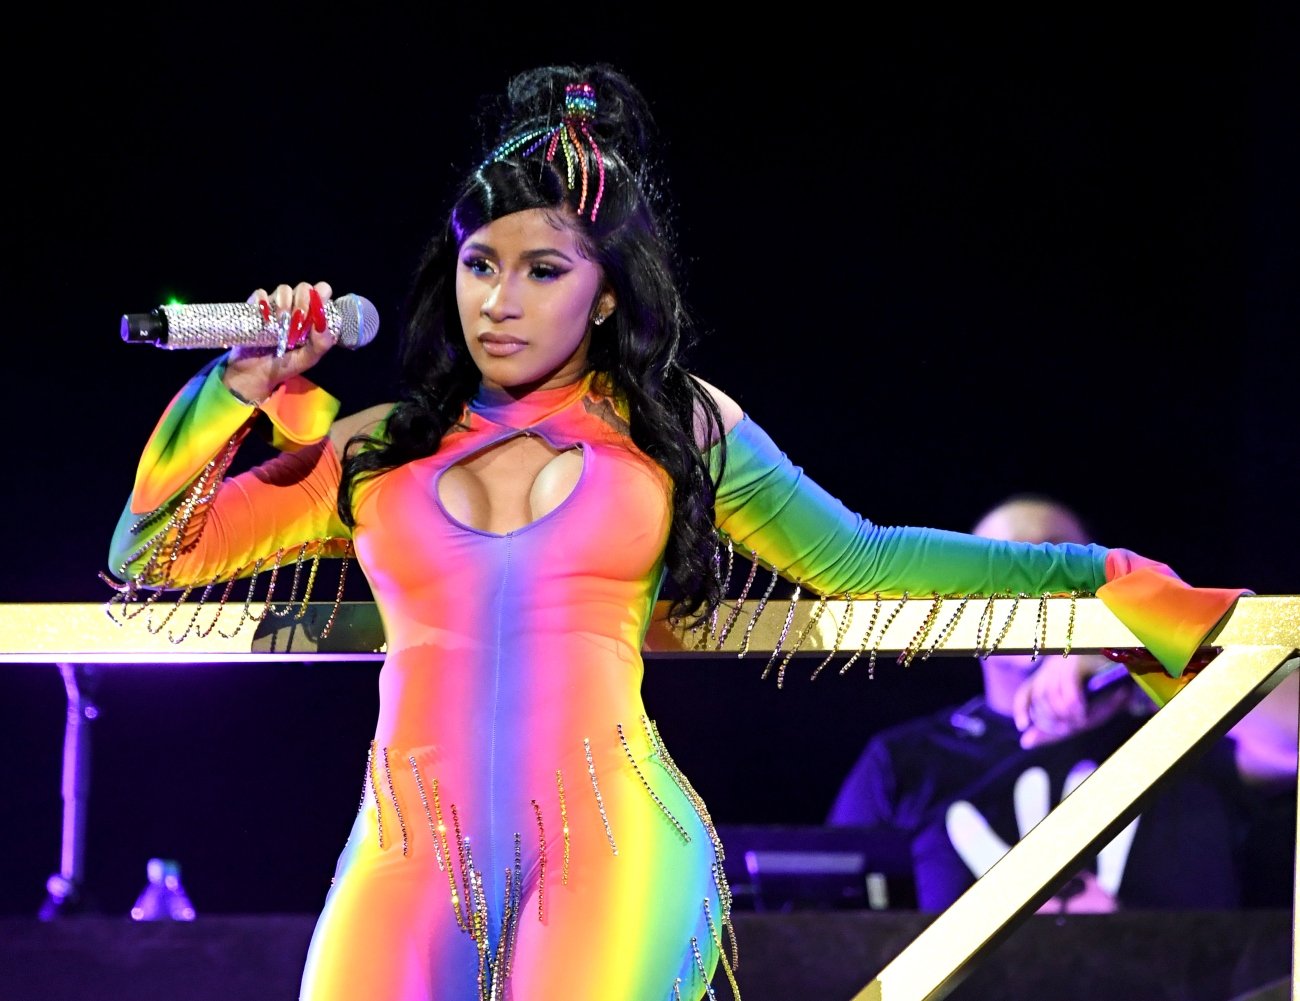 Cardi B OnlyFans is live but what is she doing there? In this pic, the rapper is wearing a rainbow onesie on stage.